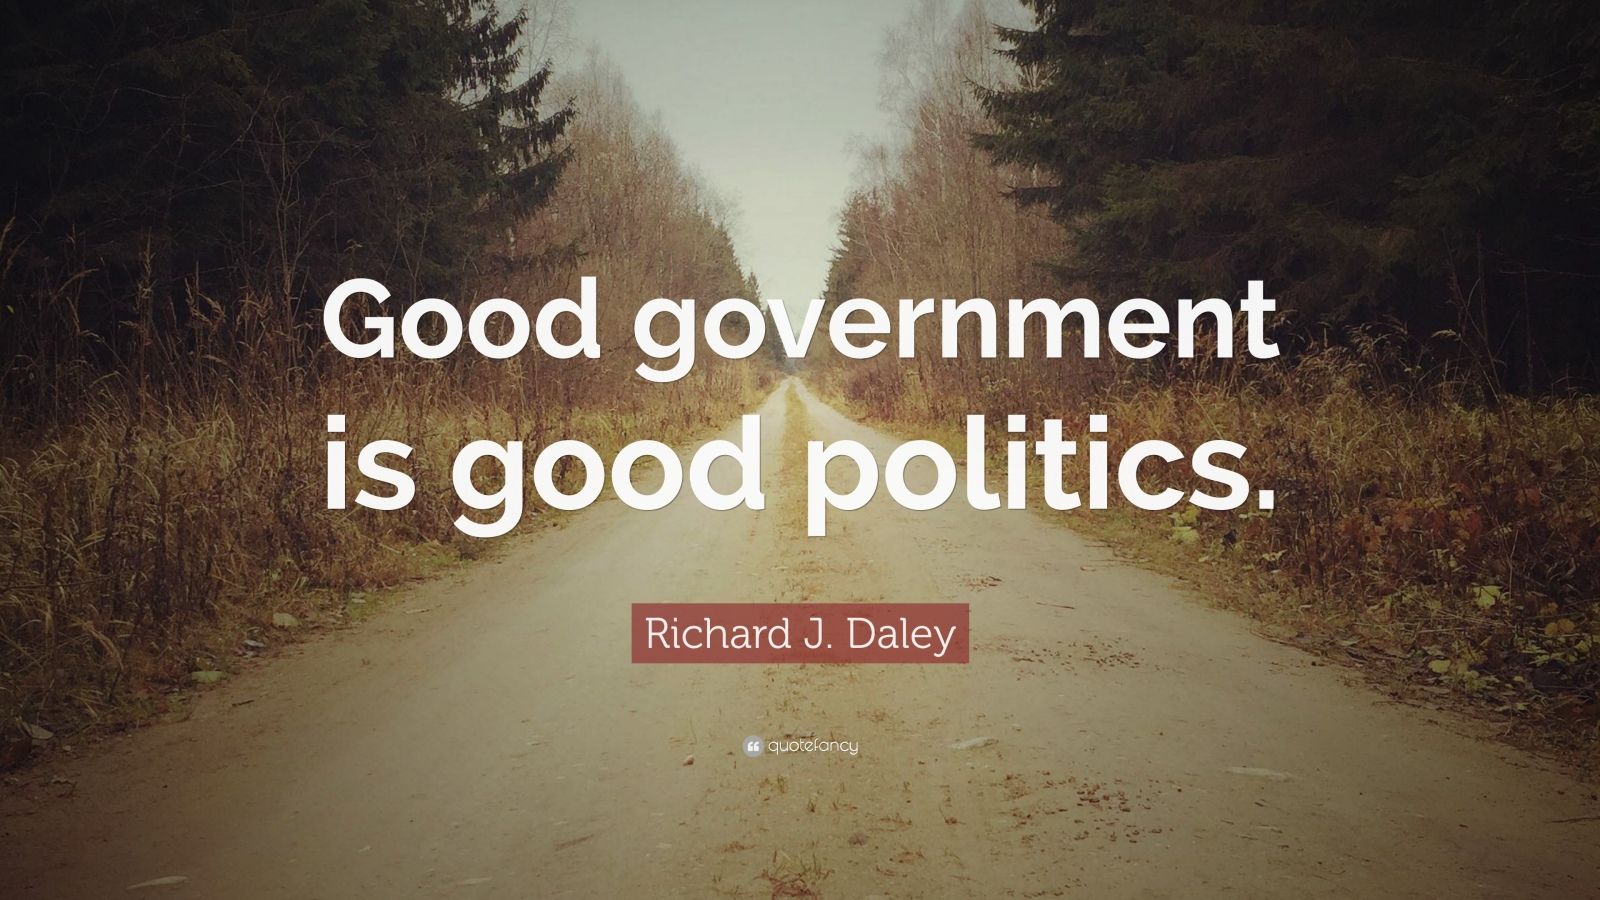 Top 20 Richard J. Daley Quotes | 2021 Edition | Free Images - QuoteFancy